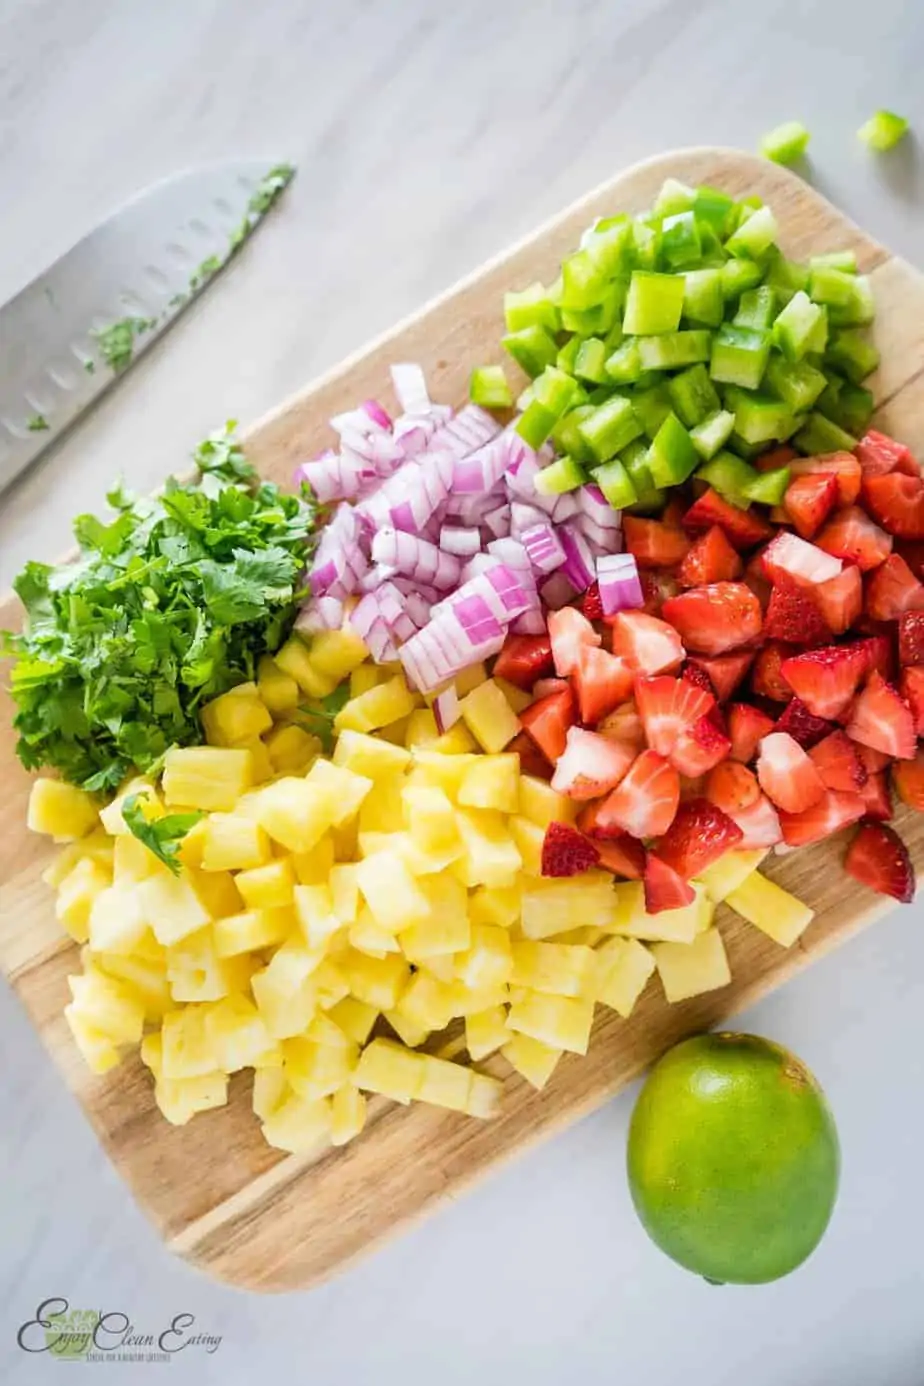 diced fruits and vegetables to make strawberry pineapple salsa